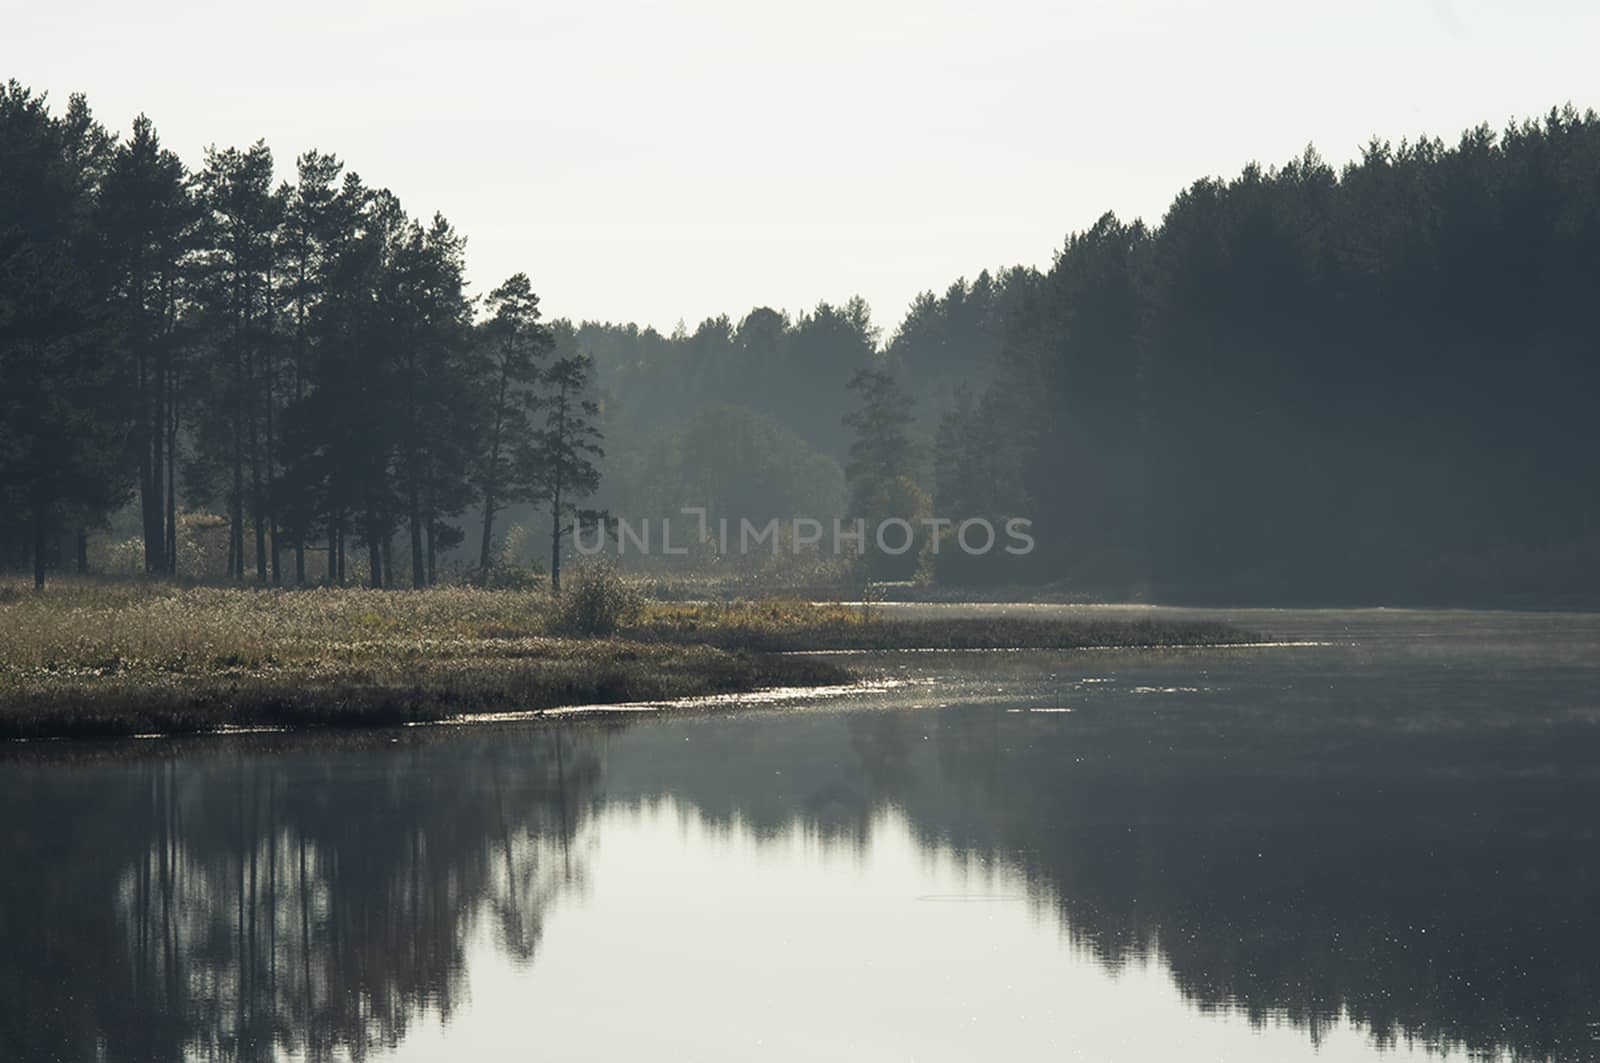 Water near forest. Reflecting trees in the water. by DePo